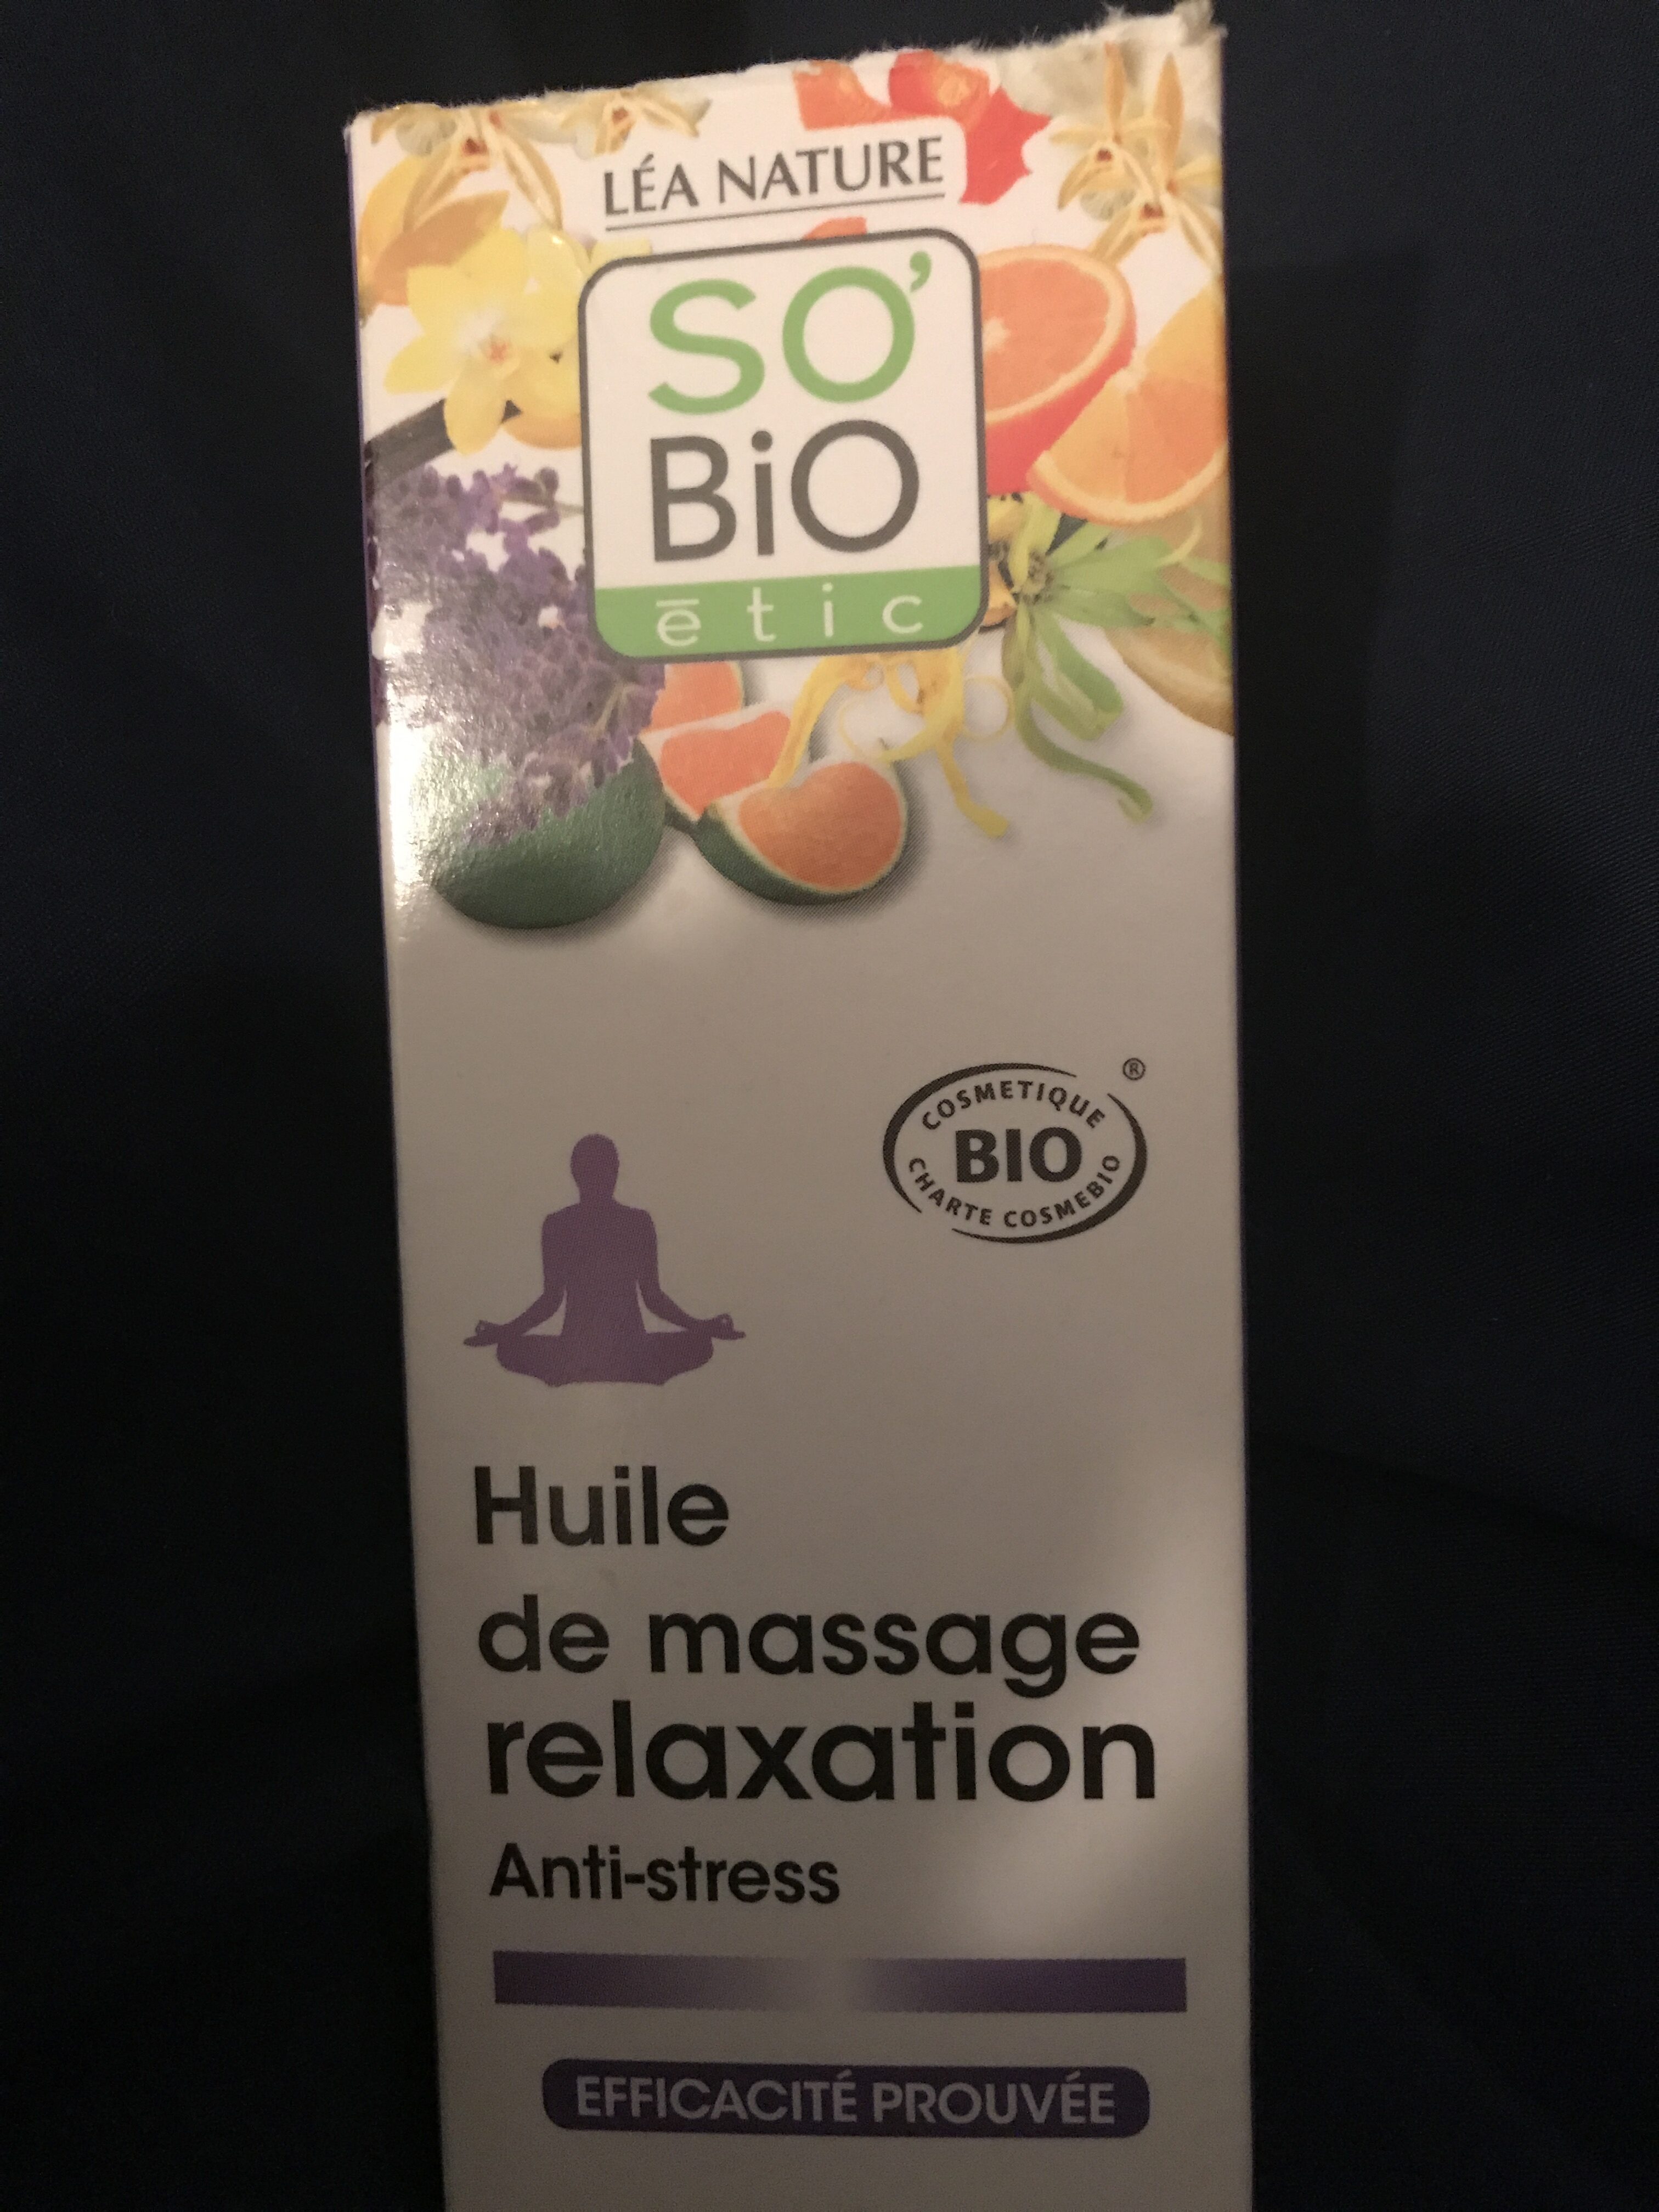 Huile de massage relaxation - Tuote - fr